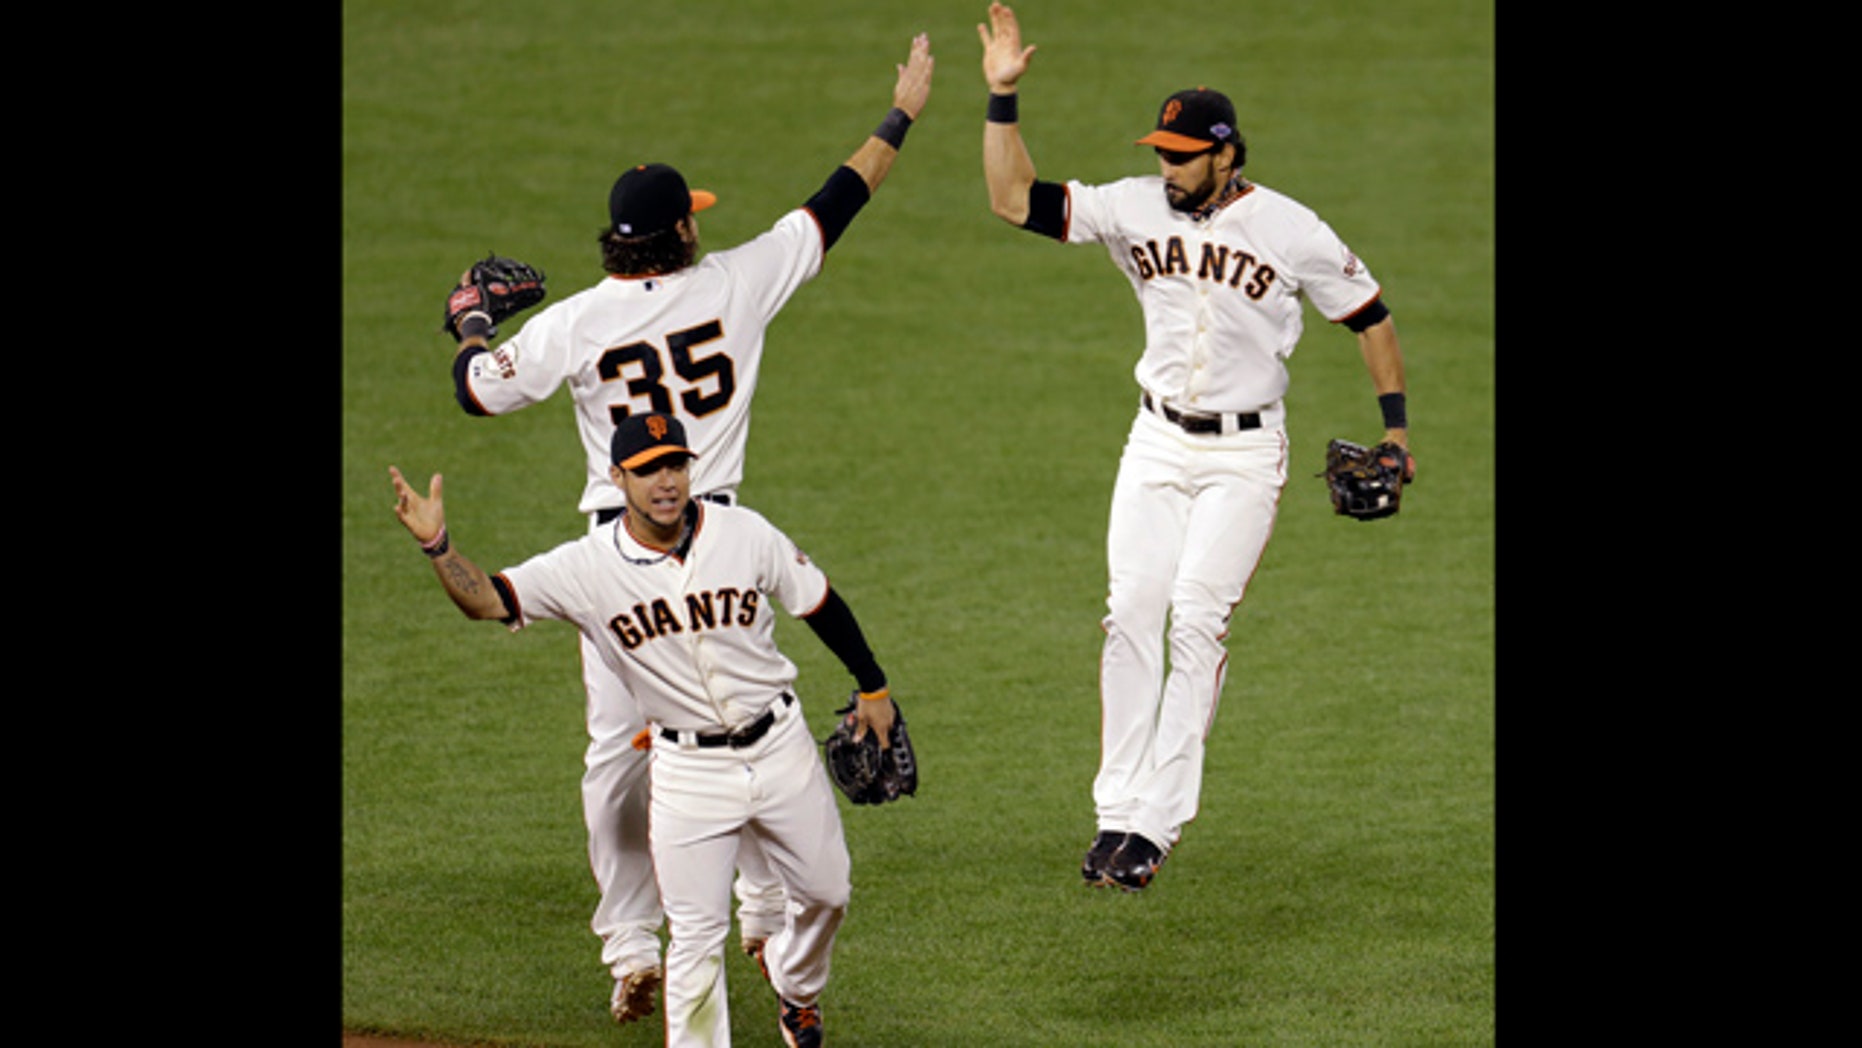 Giants force NLCS Game 7 against Cardinals after 6-1 win | Fox News